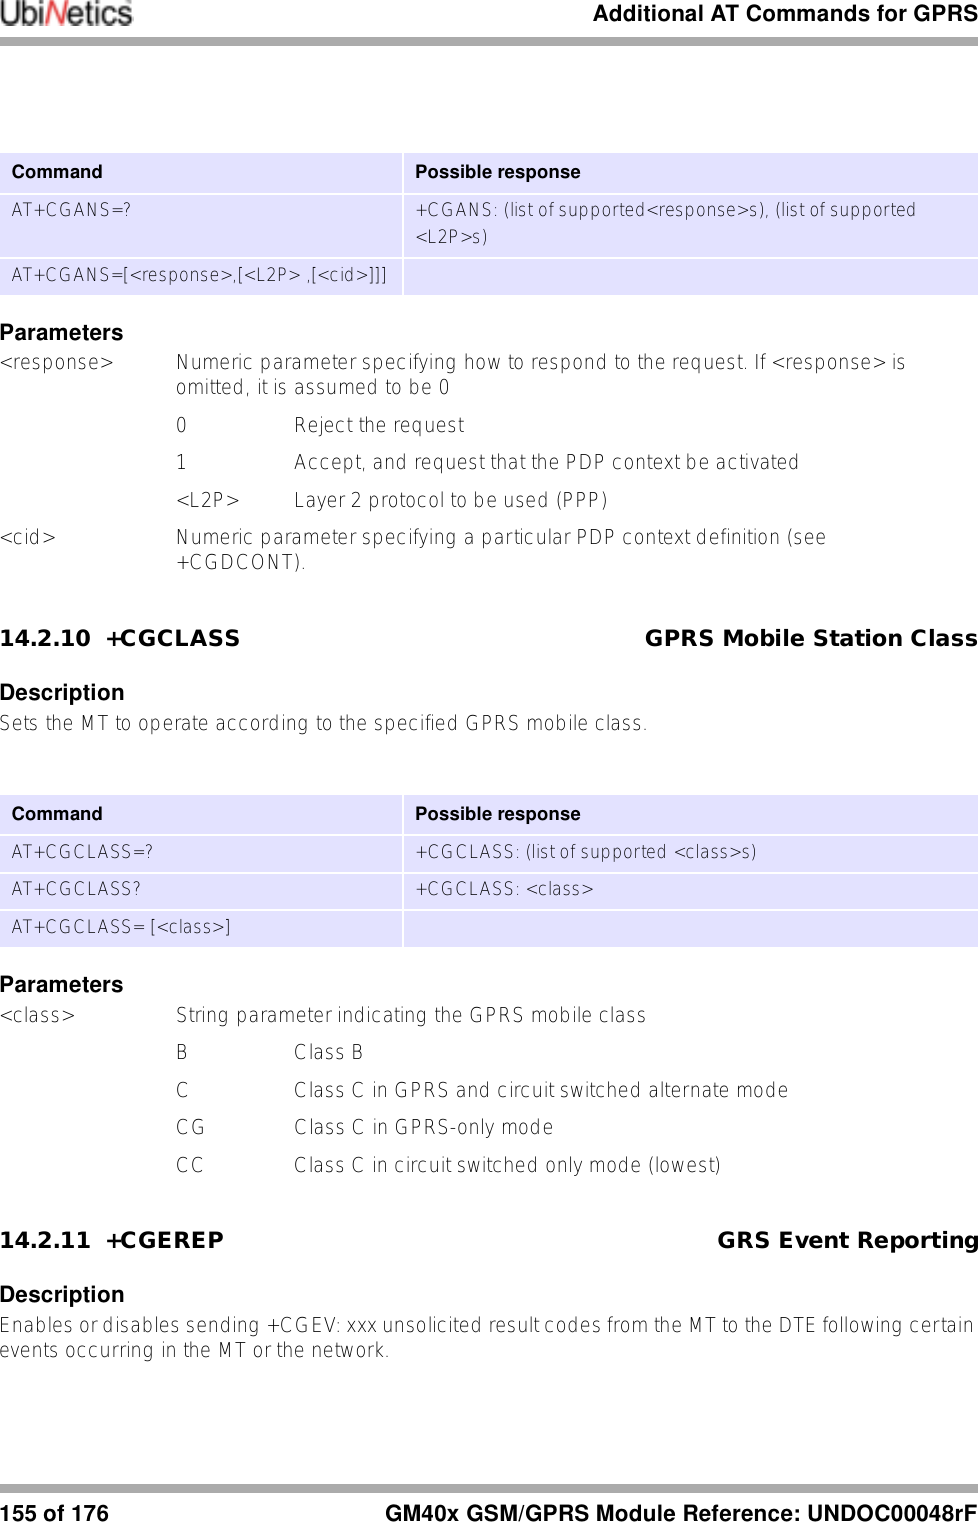 Additional AT Commands for GPRS155 of 176 GM40x GSM/GPRS Module Reference: UNDOC00048rFParameters&lt;response&gt; Numeric parameter specifying how to respond to the request. If &lt;response&gt; is omitted, it is assumed to be 00  Reject the request1  Accept, and request that the PDP context be activated&lt;L2P&gt; Layer 2 protocol to be used (PPP)&lt;cid&gt; Numeric parameter specifying a particular PDP context definition (see +CGDCONT).14.2.10 +CGCLASS GPRS Mobile Station ClassDescriptionSets the MT to operate according to the specified GPRS mobile class.Parameters&lt;class&gt; String parameter indicating the GPRS mobile classB Class BC  Class C in GPRS and circuit switched alternate modeCG  Class C in GPRS-only modeCC  Class C in circuit switched only mode (lowest)14.2.11 +CGEREP GRS Event ReportingDescriptionEnables or disables sending +CGEV: xxx unsolicited result codes from the MT to the DTE following certain events occurring in the MT or the network.Command  Possible responseAT+CGANS=? +CGANS: (list of supported&lt;response&gt;s), (list of supported&lt;L2P&gt;s)AT+CGANS=[&lt;response&gt;,[&lt;L2P&gt; ,[&lt;cid&gt;]]]Command  Possible responseAT+CGCLASS=? +CGCLASS: (list of supported &lt;class&gt;s)AT+CGCLASS? +CGCLASS: &lt;class&gt;AT+CGCLASS= [&lt;class&gt;]